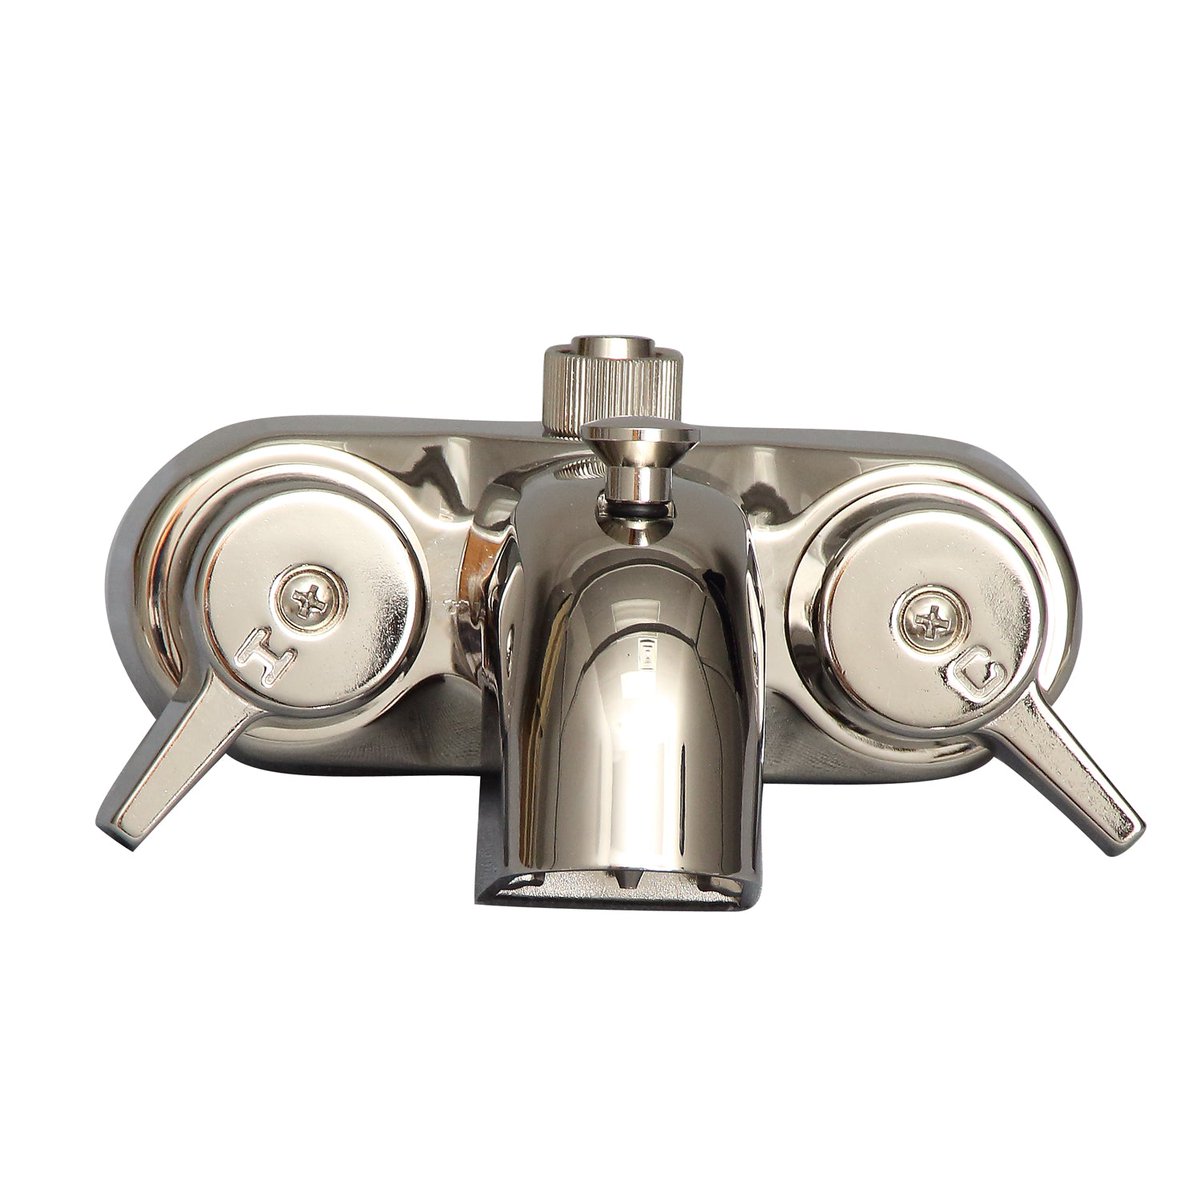 #DailyFaucet: Barclay Products Washerless Diverter Bathcock bit.ly/2QeNLR6